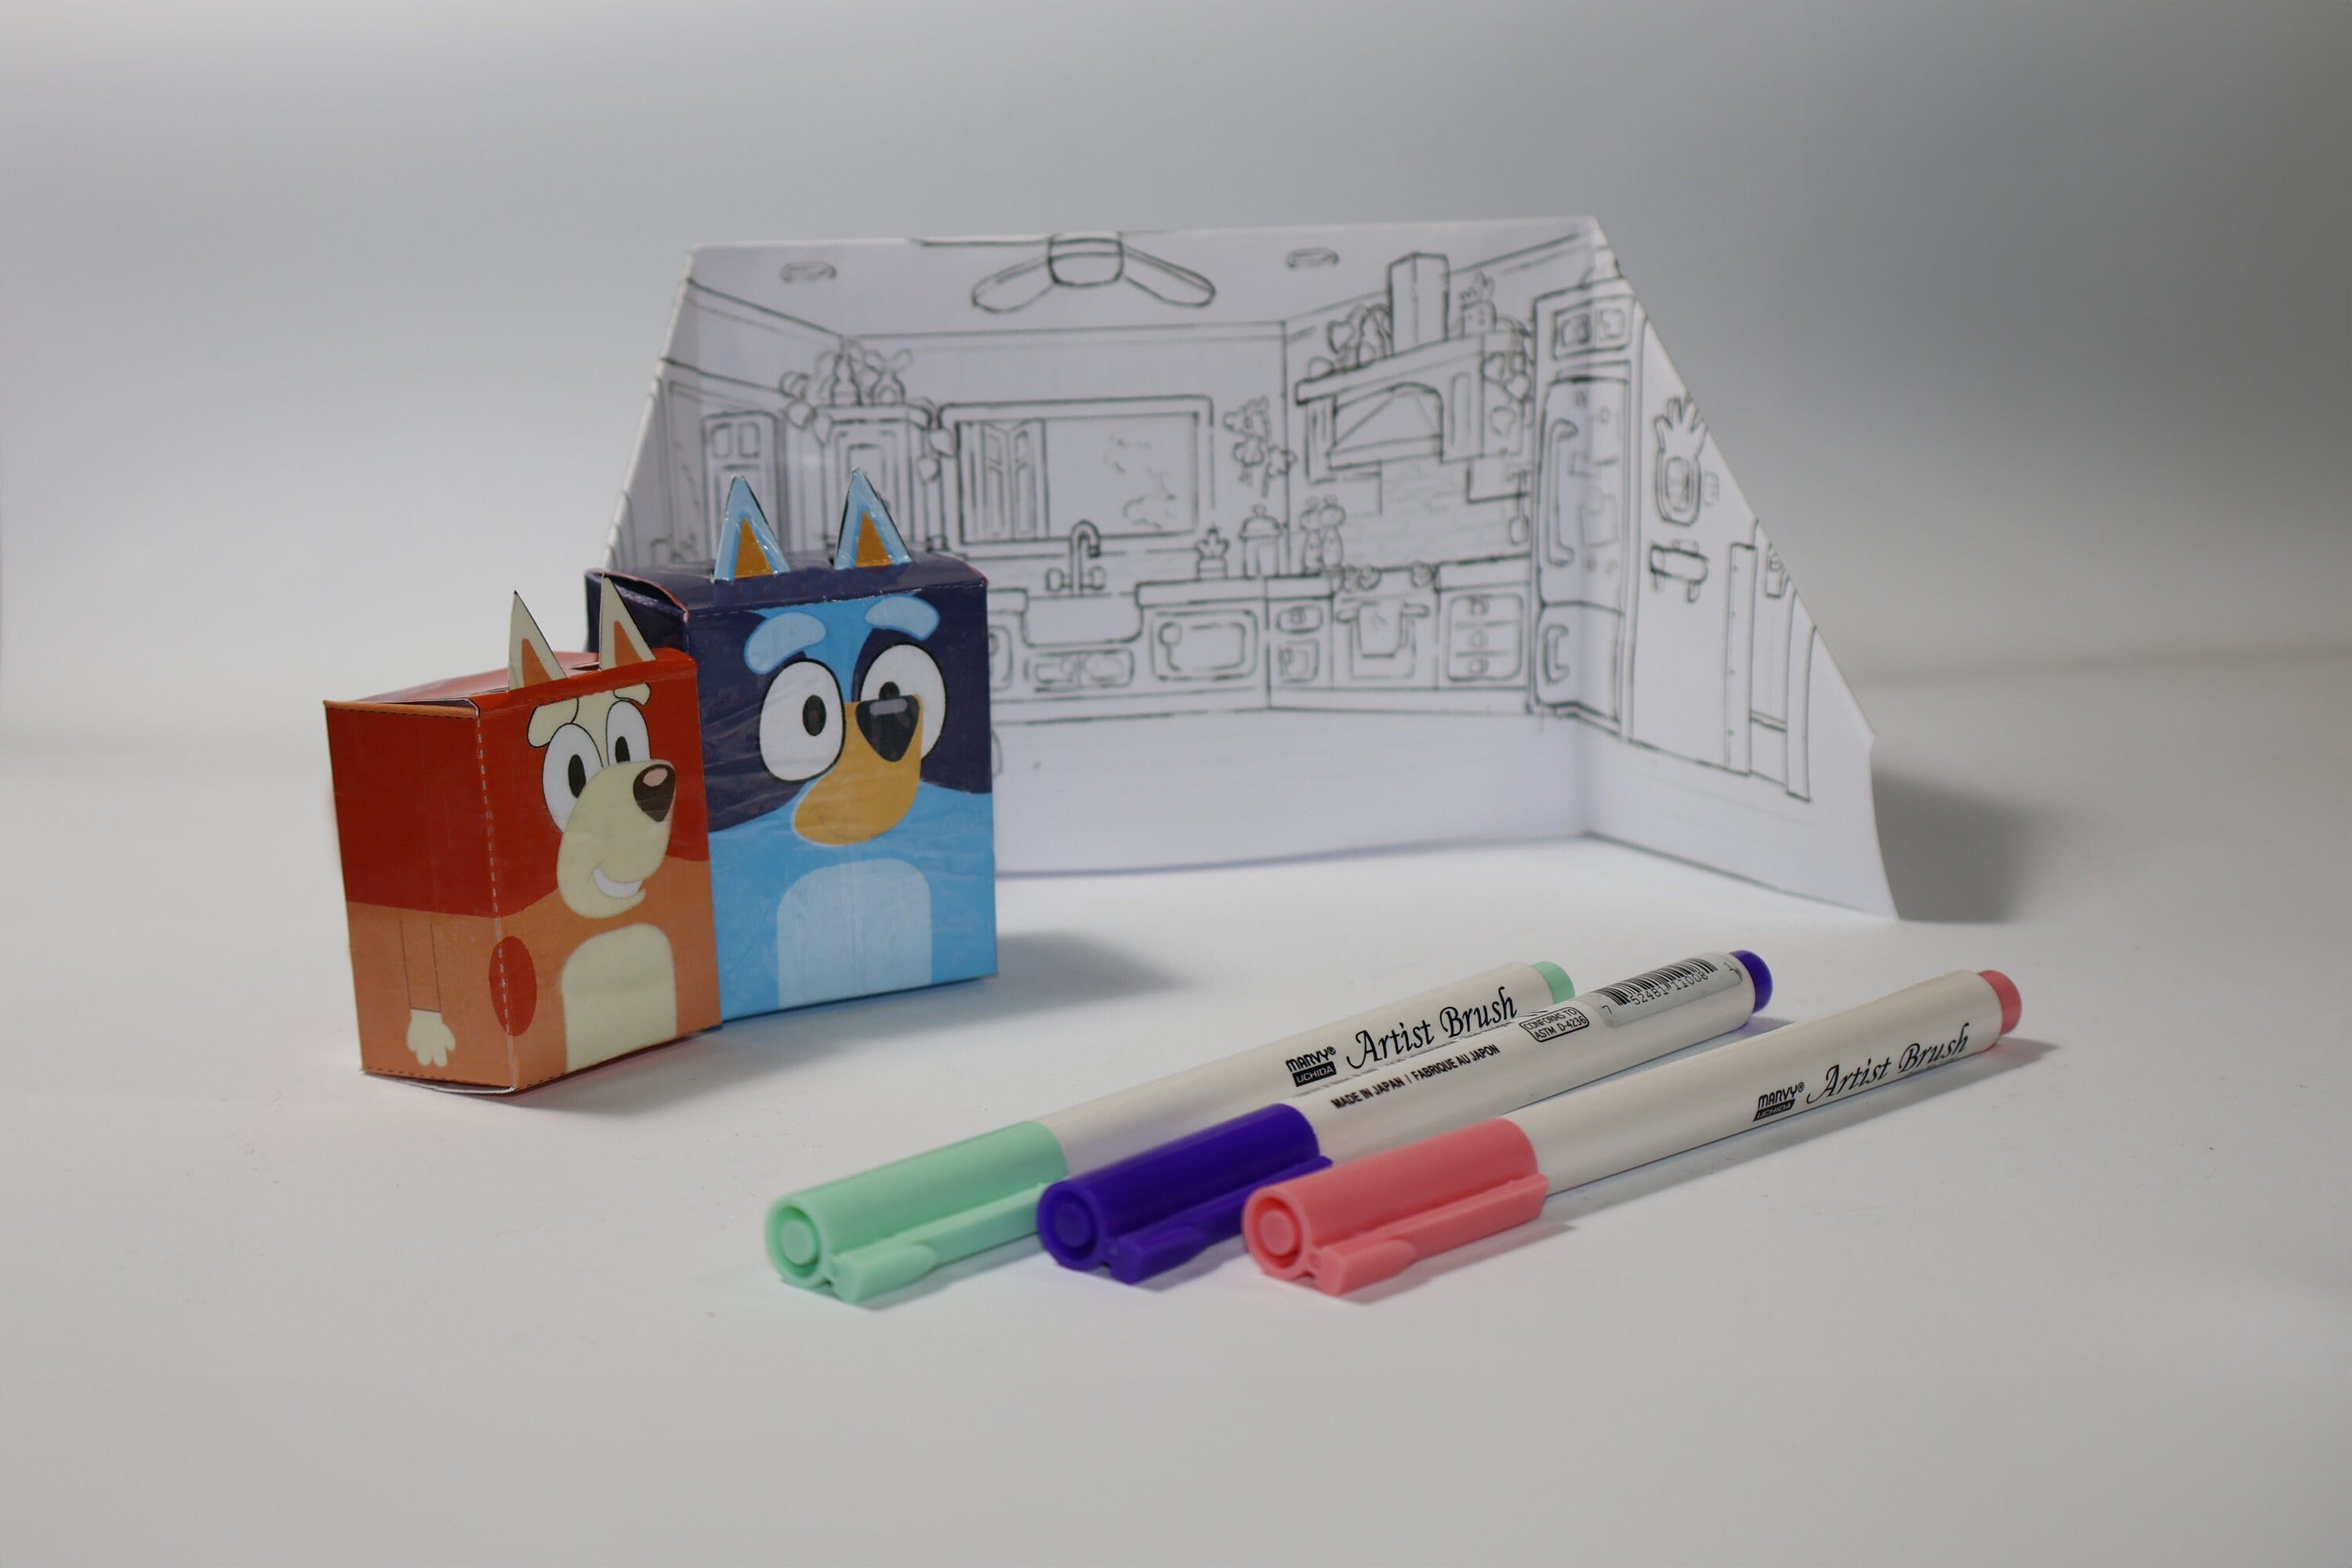 Downloadable Bluey and Bingo Paper Toy Models! Get Yours Now for Fun Crafting at Home! Instant Digital Access Available!